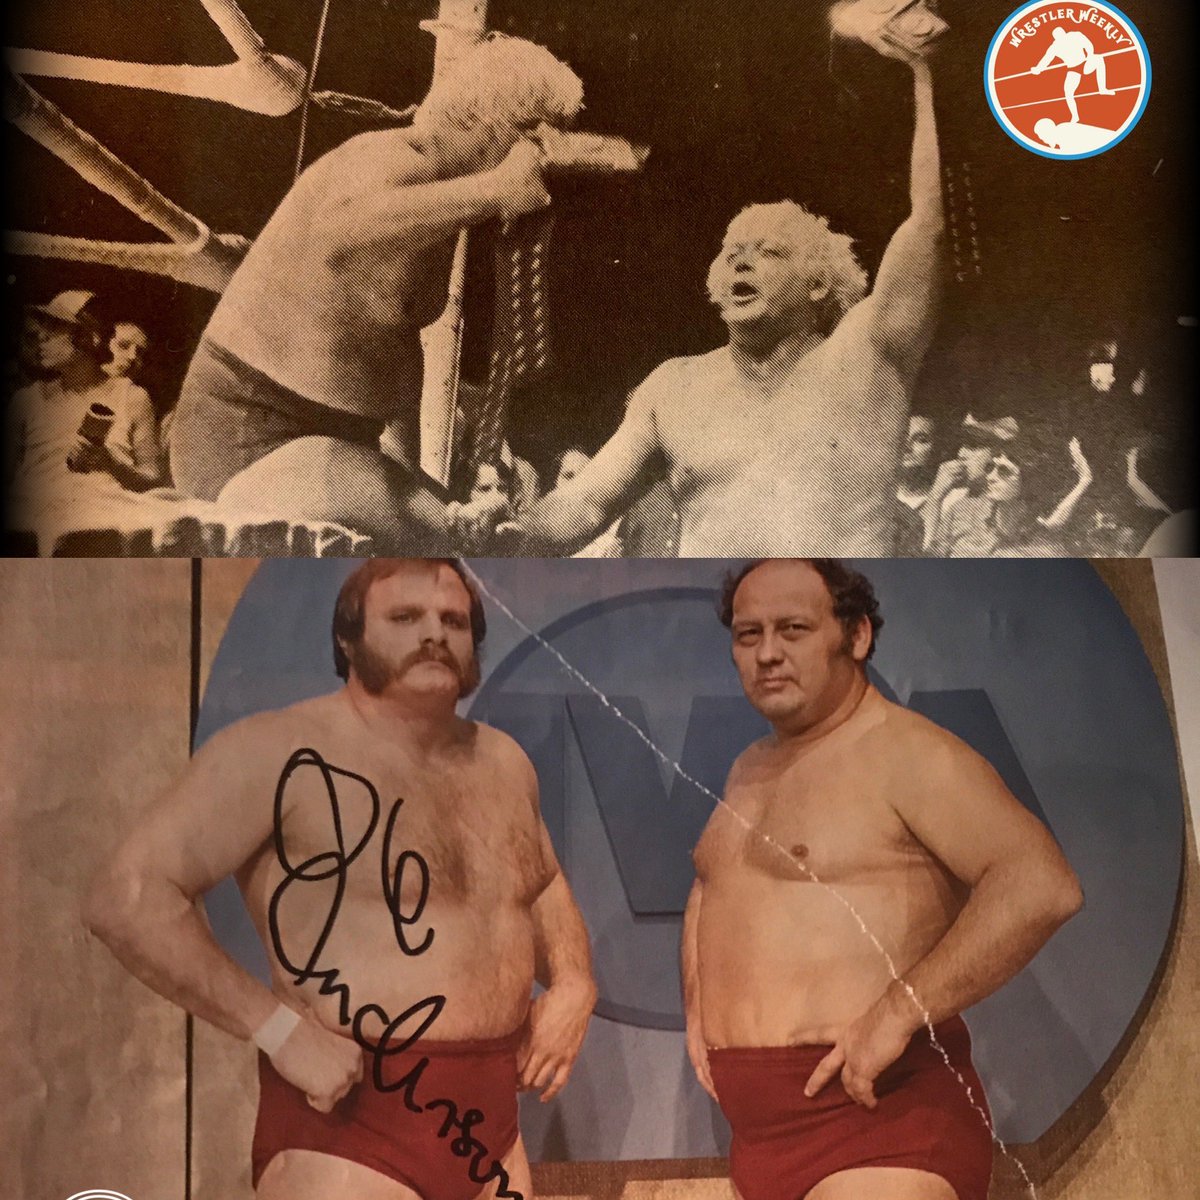 WRESTLER WEEKLY #wwTuesdayTakeaway WHAT IS YOUR DREAM TAG TEAM MATCHUP?! Mine is #TheAndersons vs #TheBlondBombers #OleAnderson & #GeneAnderson vs #RayStevens & #PatPatterson! Closest we got was 2/7/82 Ole & #StanHansen defeated them for the vacant #NWA World Tag Titles! #SR